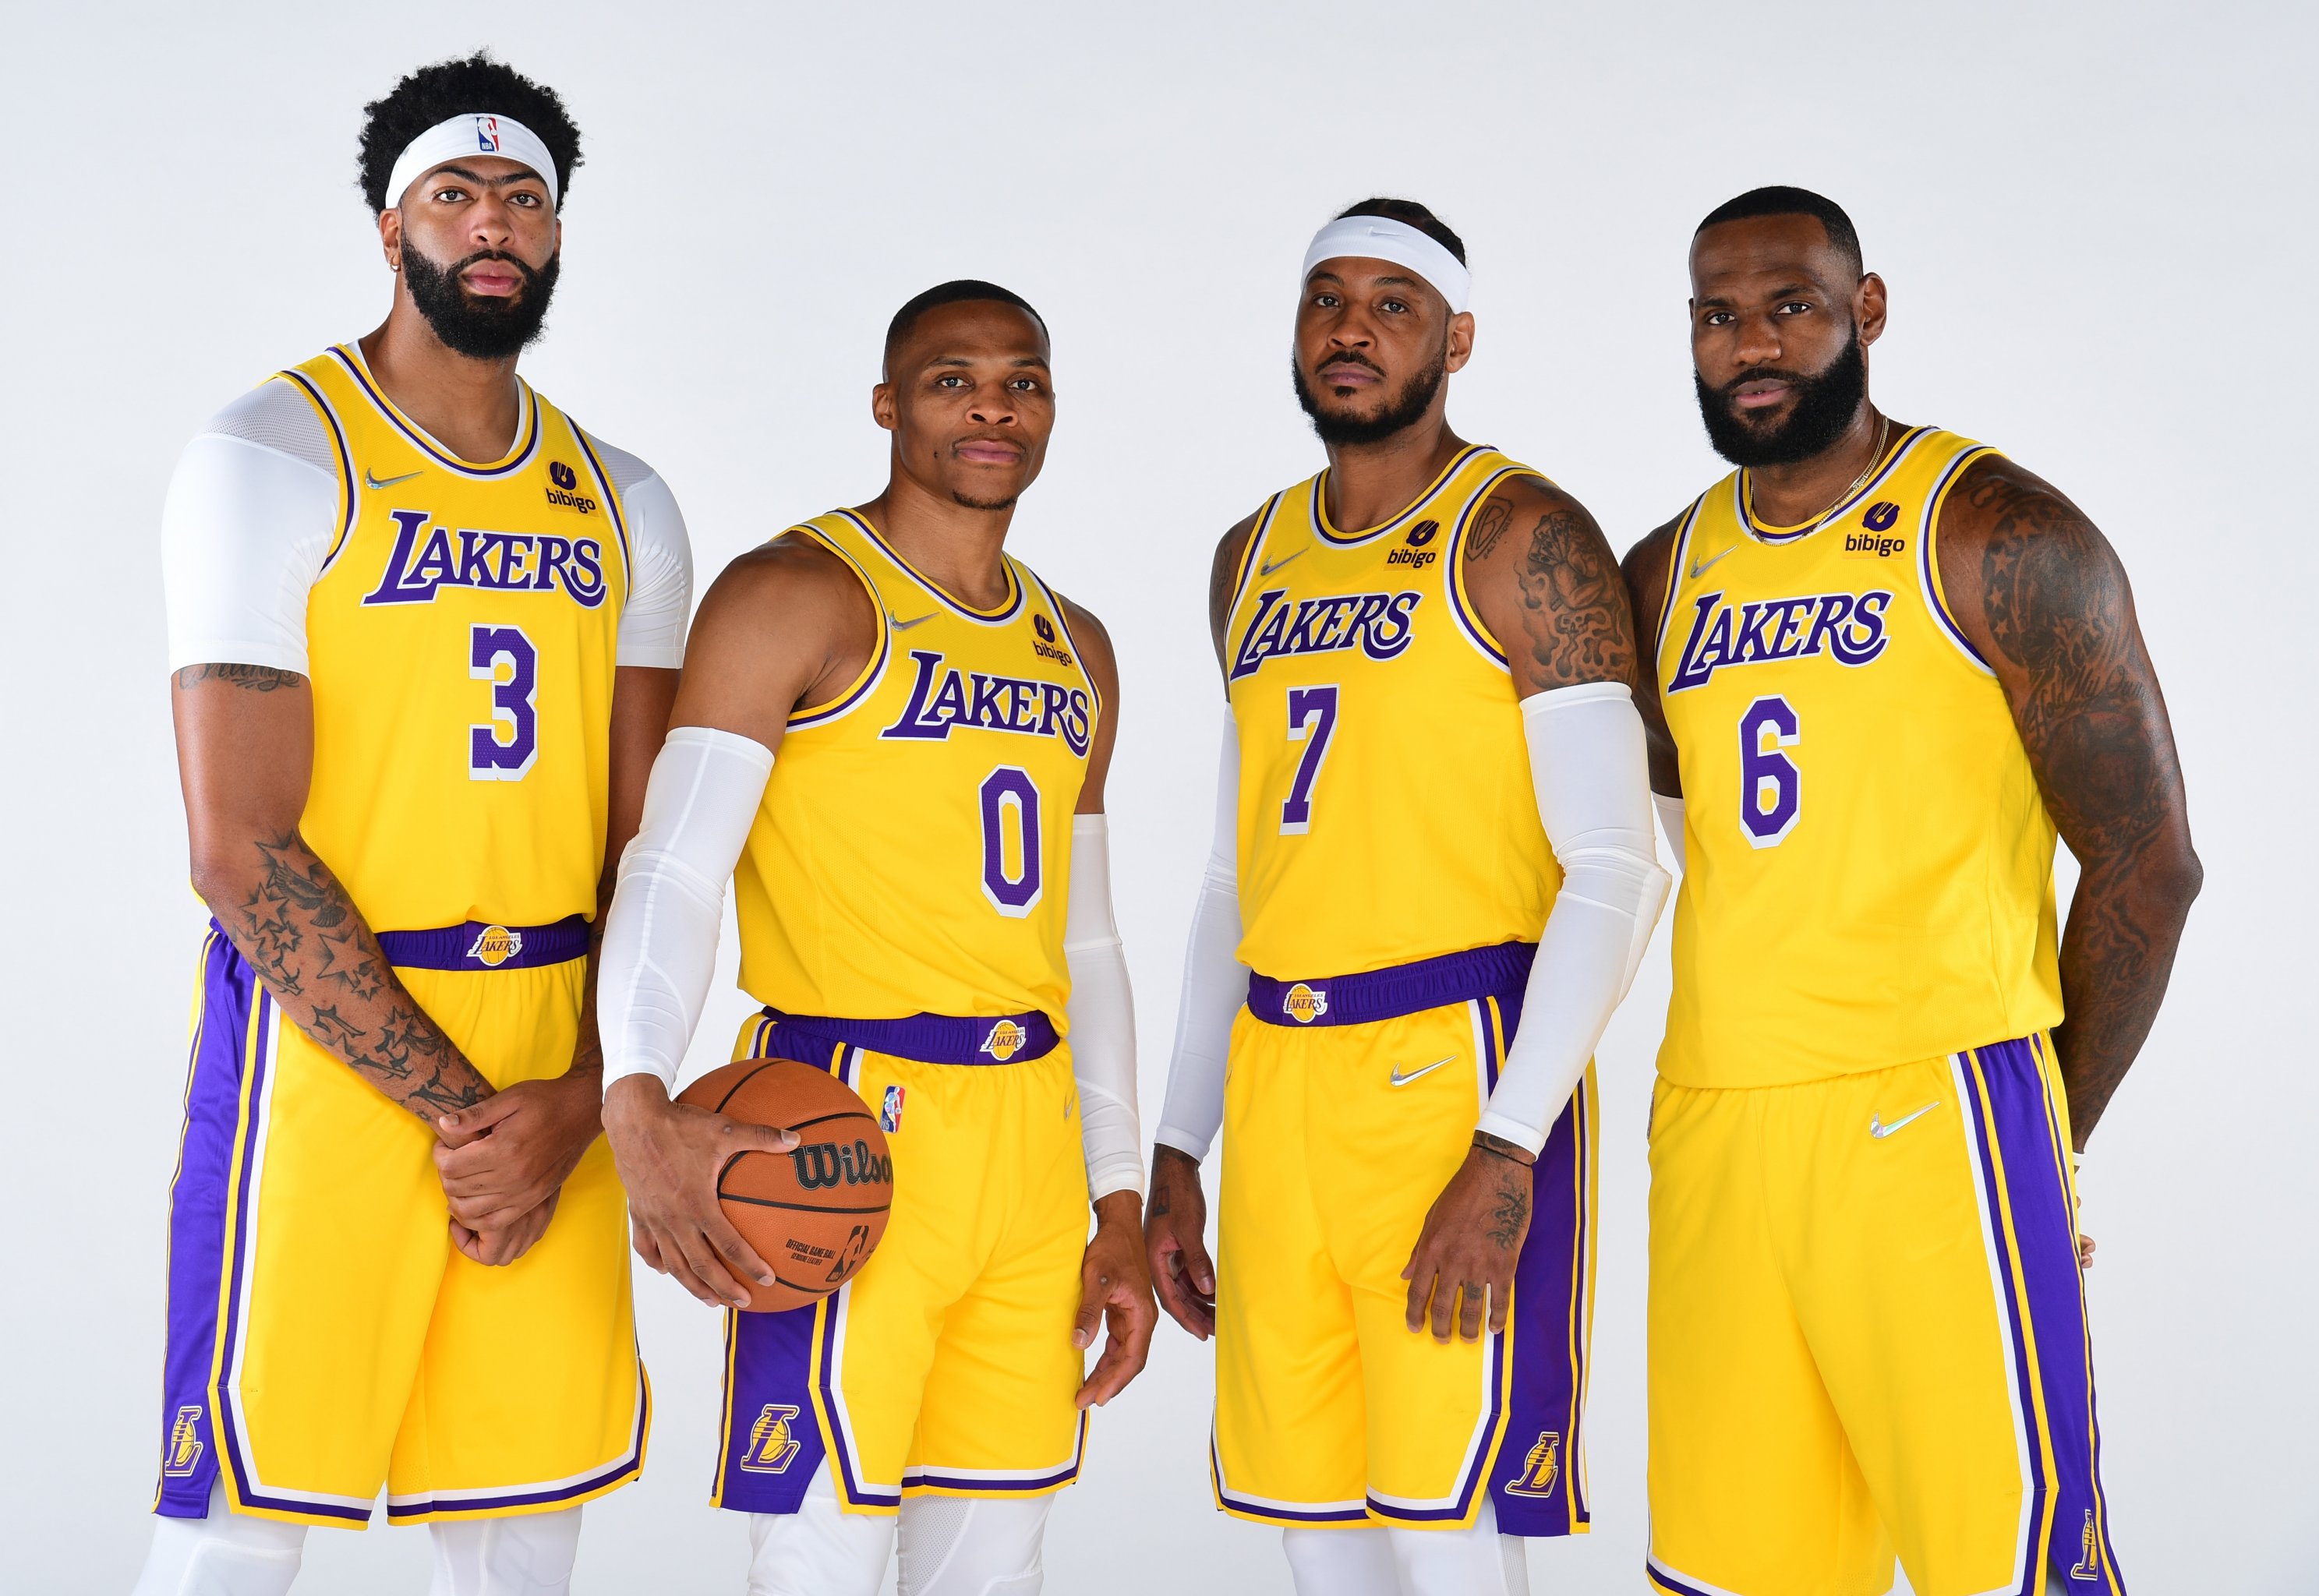 Lakers' Complete 2021-22 Season Preview and Predictions